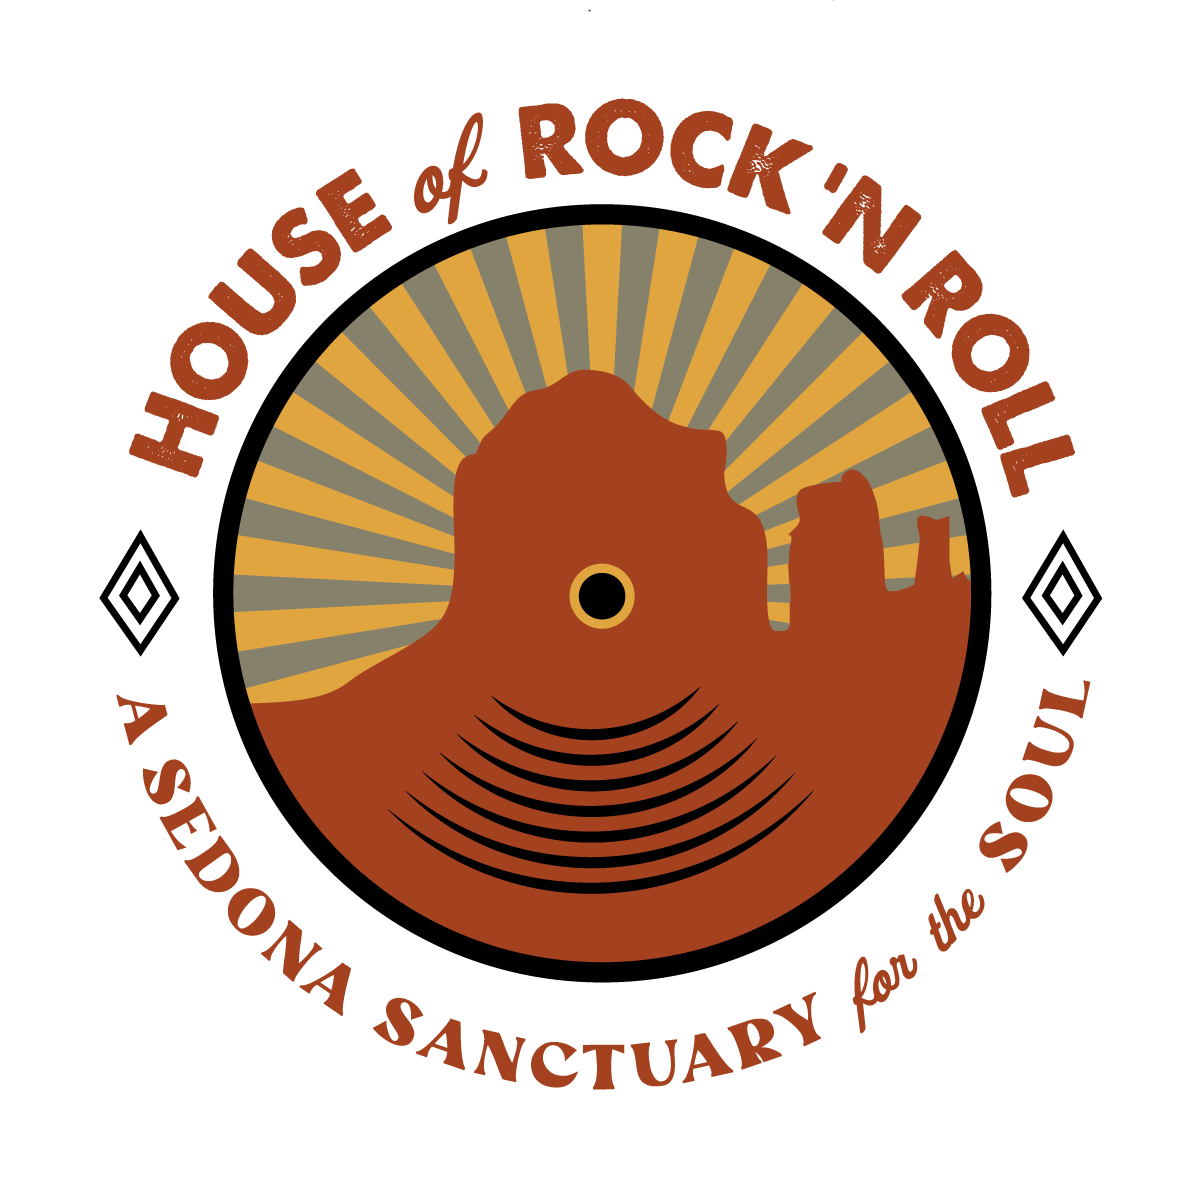 House of ROCK and Roll,  Sanctuary for your "SOUL"